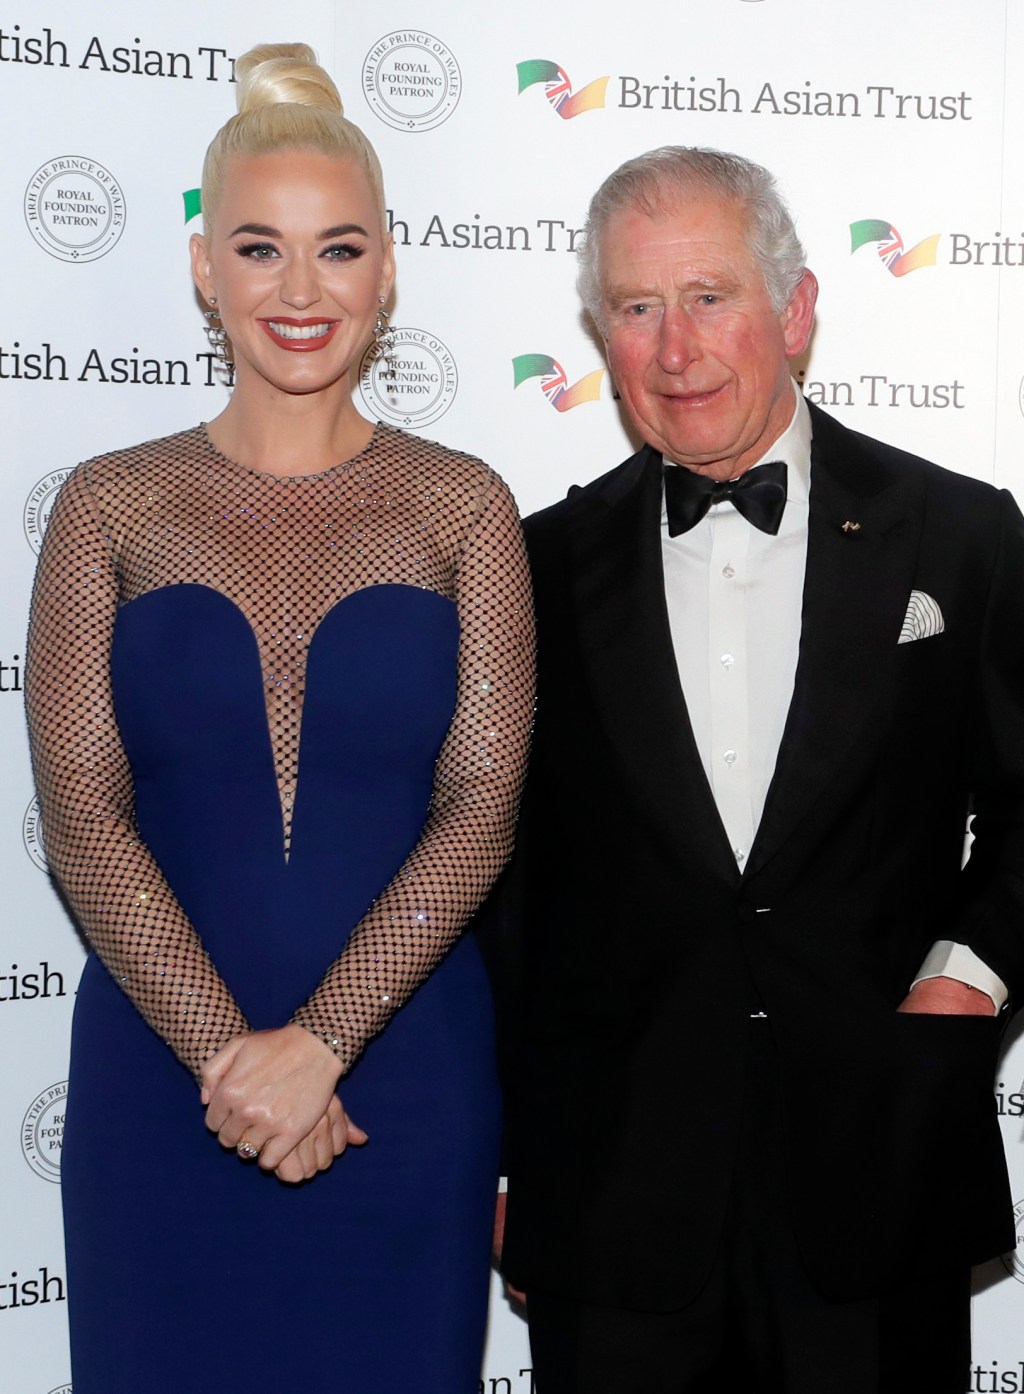 Katy Perry poses with King Charles III